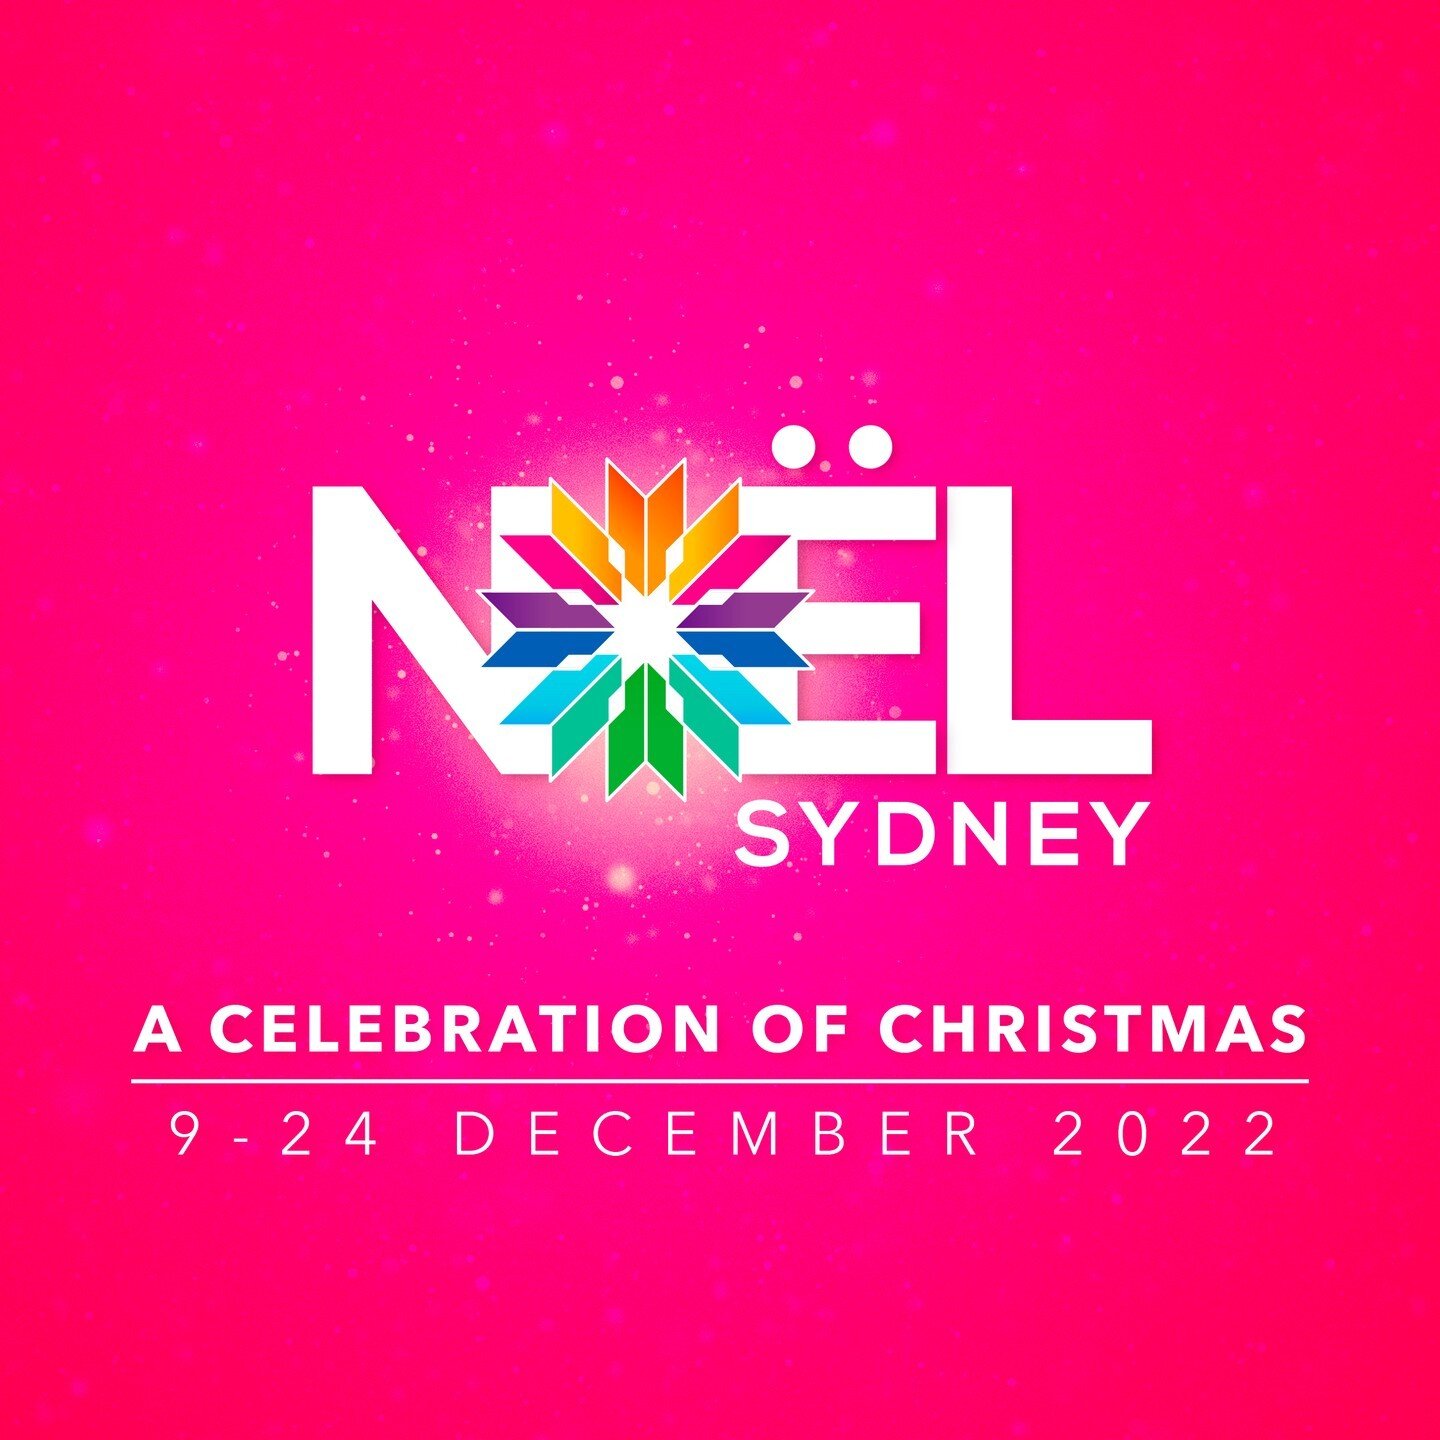 Bigger and brighter in 2022! 
We're taking Christmas in Sydney to a whole new level! Introducing NO&Euml;L SYDNEY Every night from 9-24 December the Royal Botanic Gardens, Sydney and Macquarie Street come to life with stunning projections, lighting t